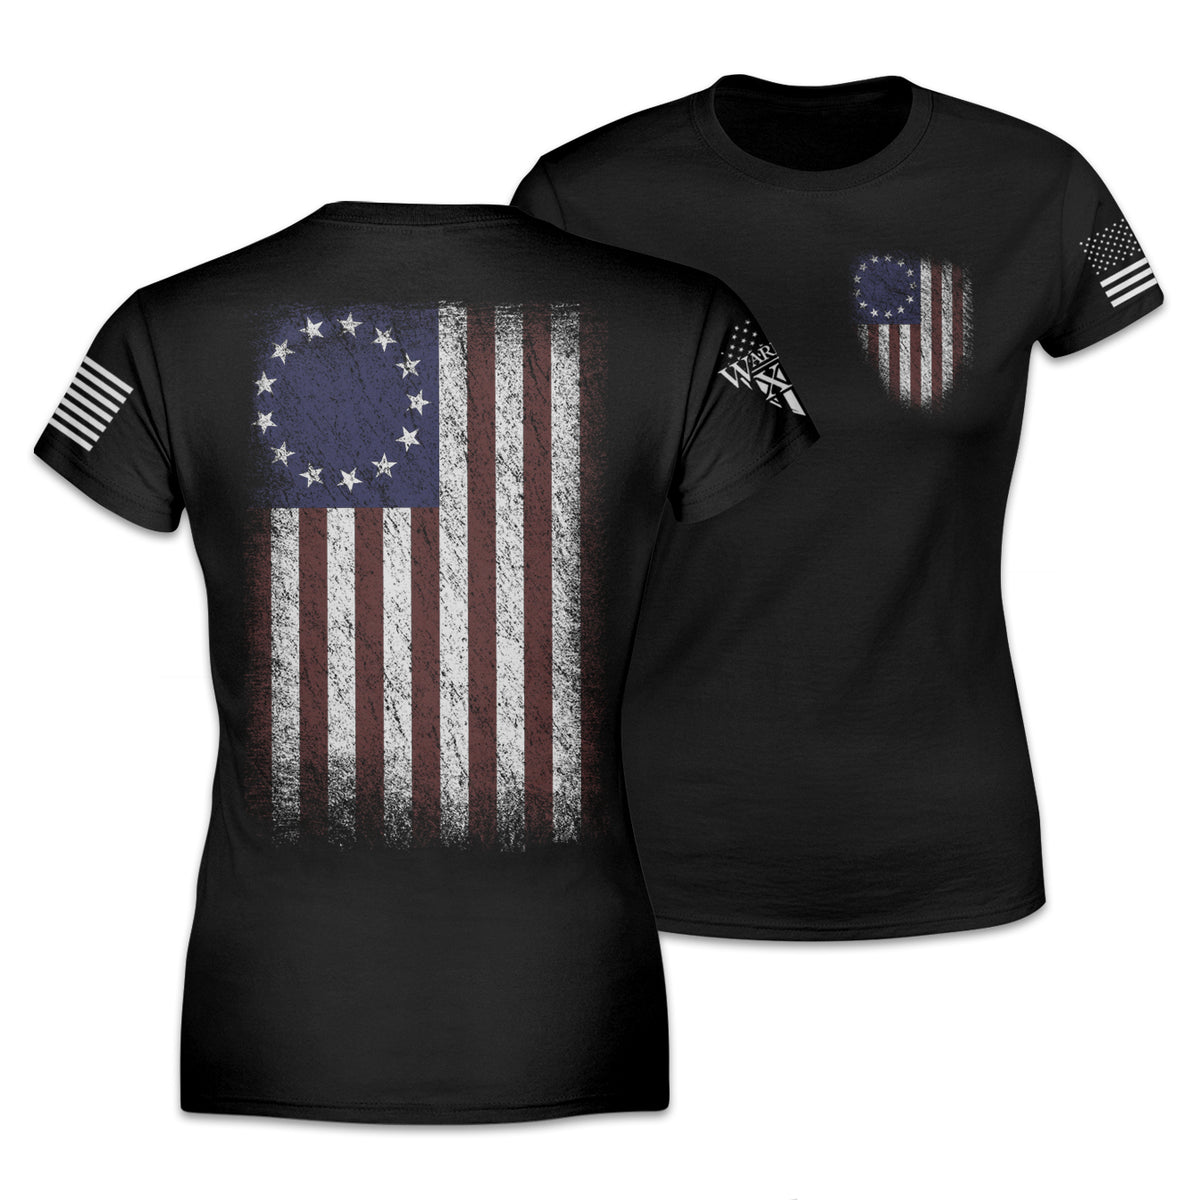 Betsy Ross Flag - Women's Relaxed Fit - Warrior 12 - A Patriotic ...